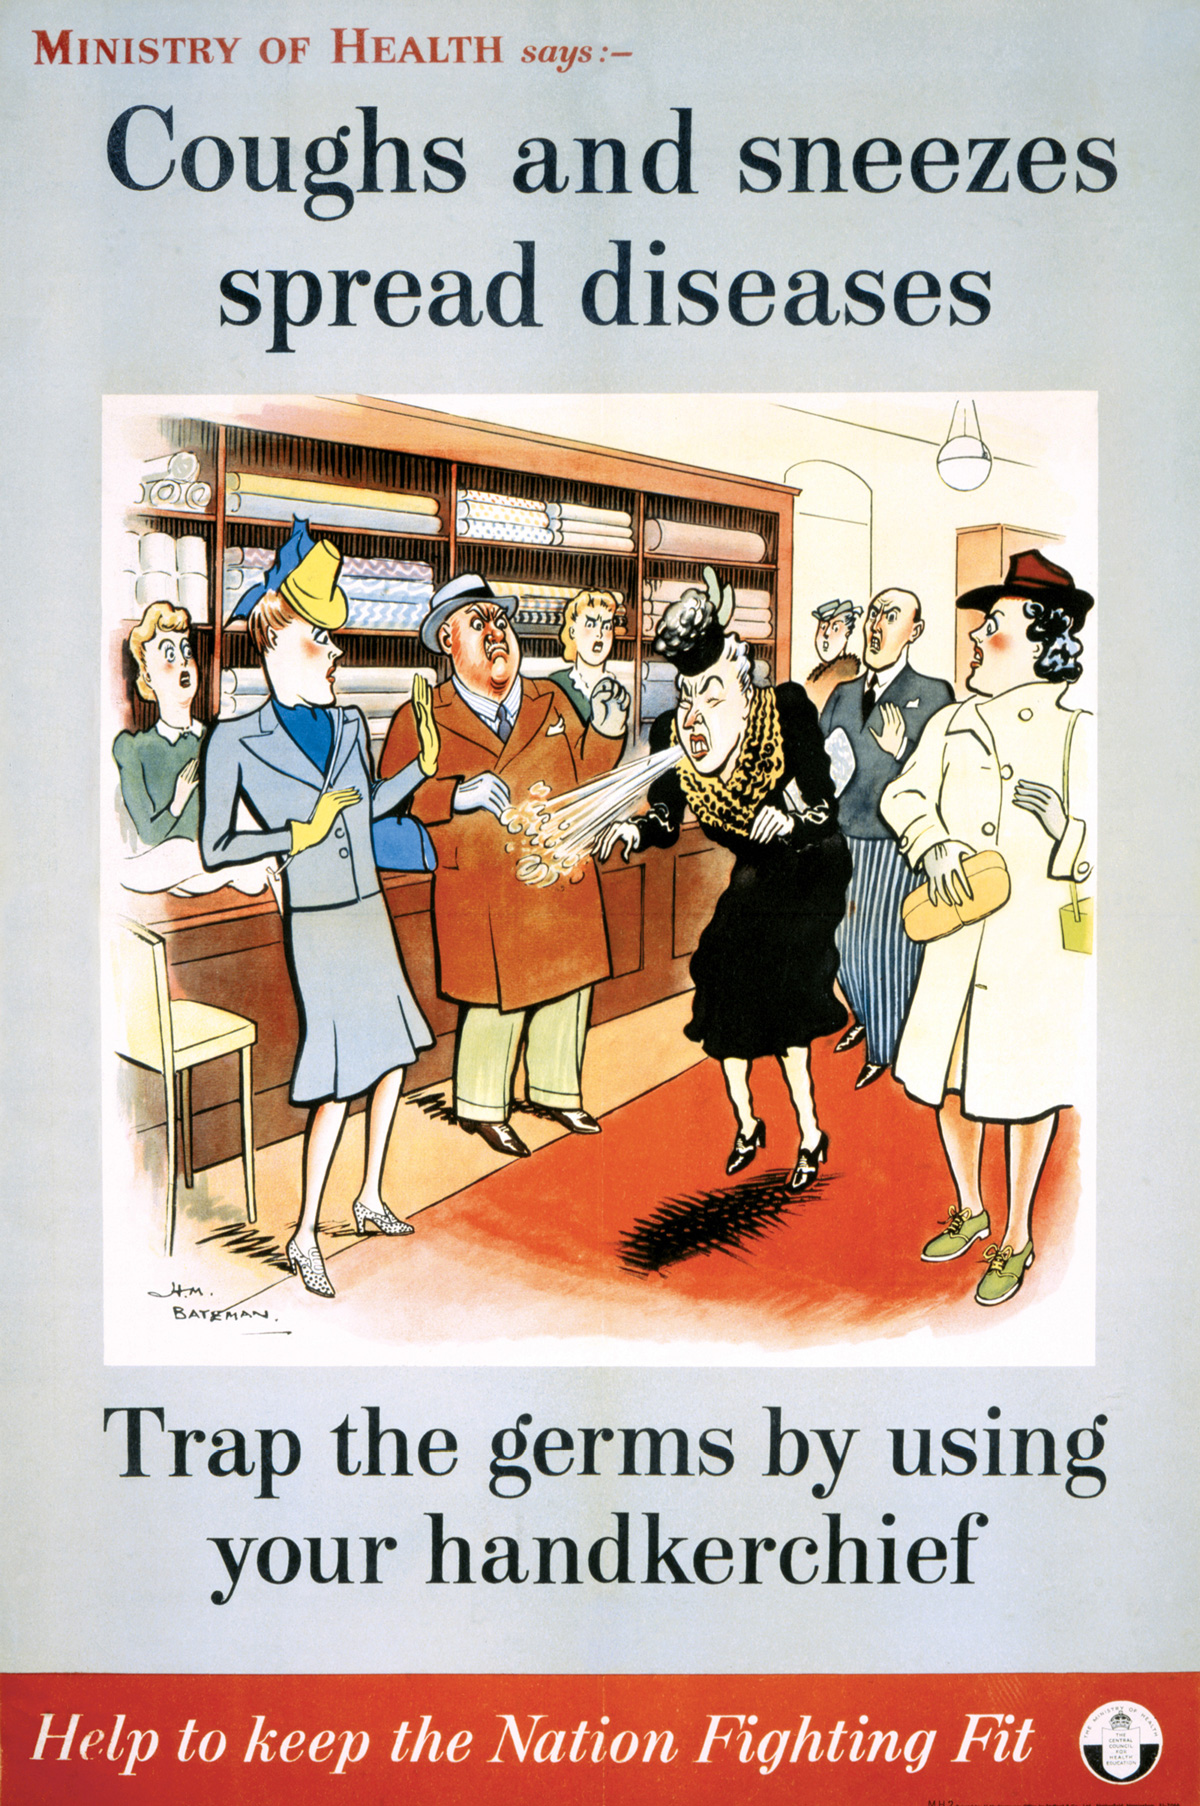 Herbert Mayo Bateman, from the “Coughs & Sneezes Spread
Diseases” series commissioned by the Ministry of Health, England,
1942. Courtesy The National Archives, Kew, Surrey, UK.